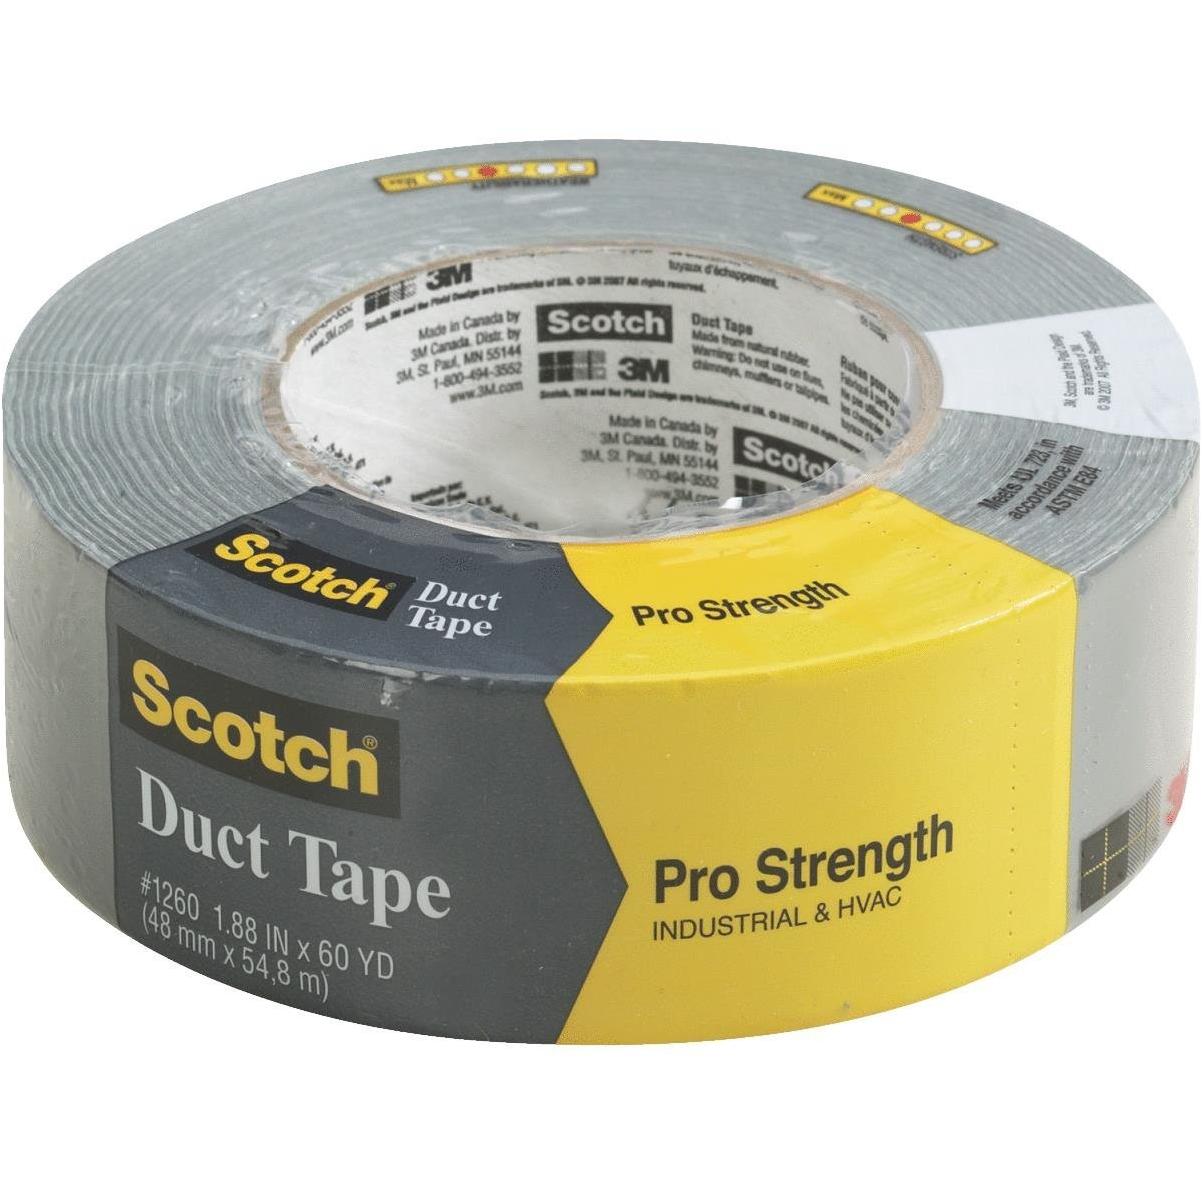 Quality Home Duct Tape Durable Multipurpose Industrial Strength 60 yd x 1.89 in 